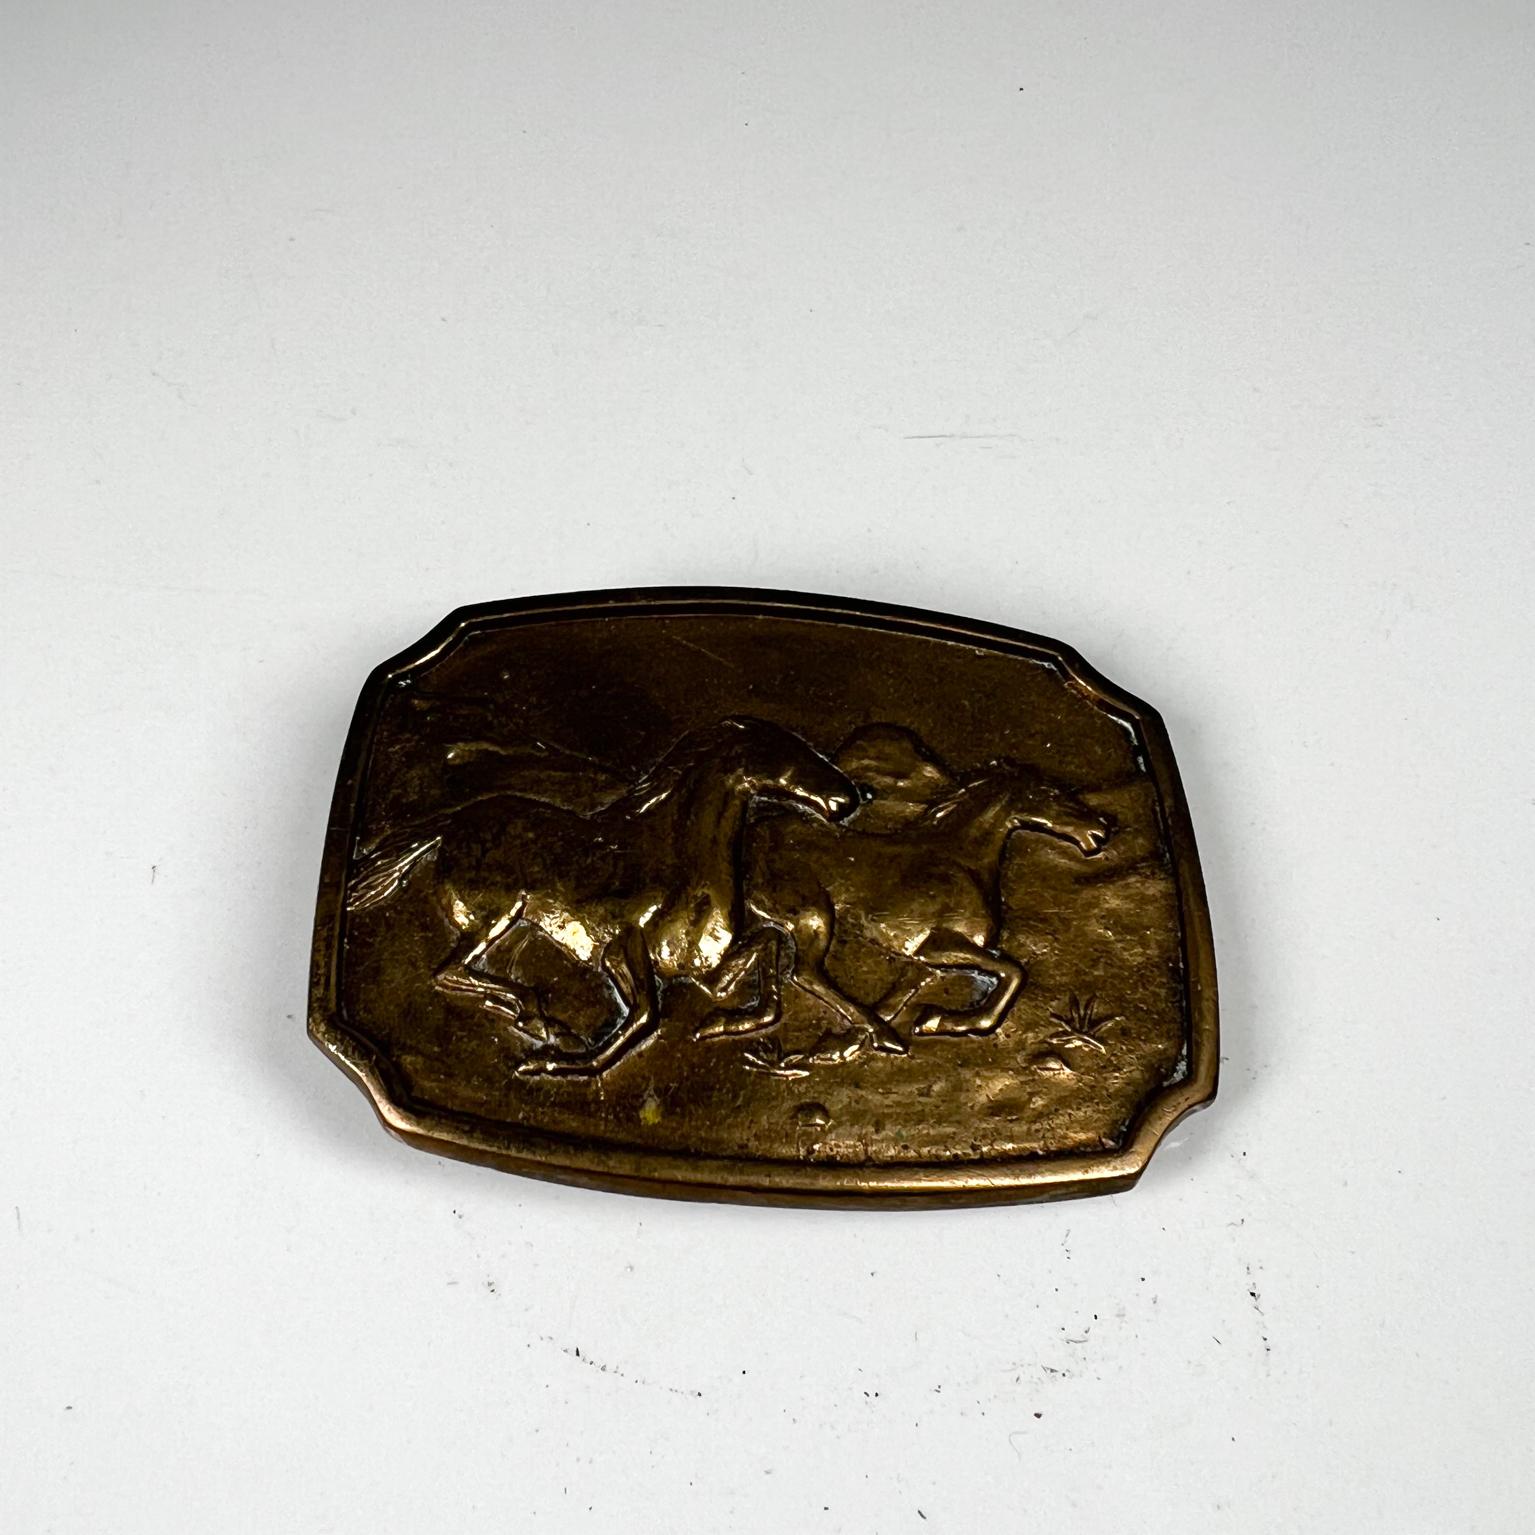 1979 BTS solid brass vintage belt Buckle Horses
3.13 x 2.25 X .23
Vintage buckle belt. Made USA
Stamped on the back with makers info.
Vintage wear present. Preowned vintage condition.
See images.



